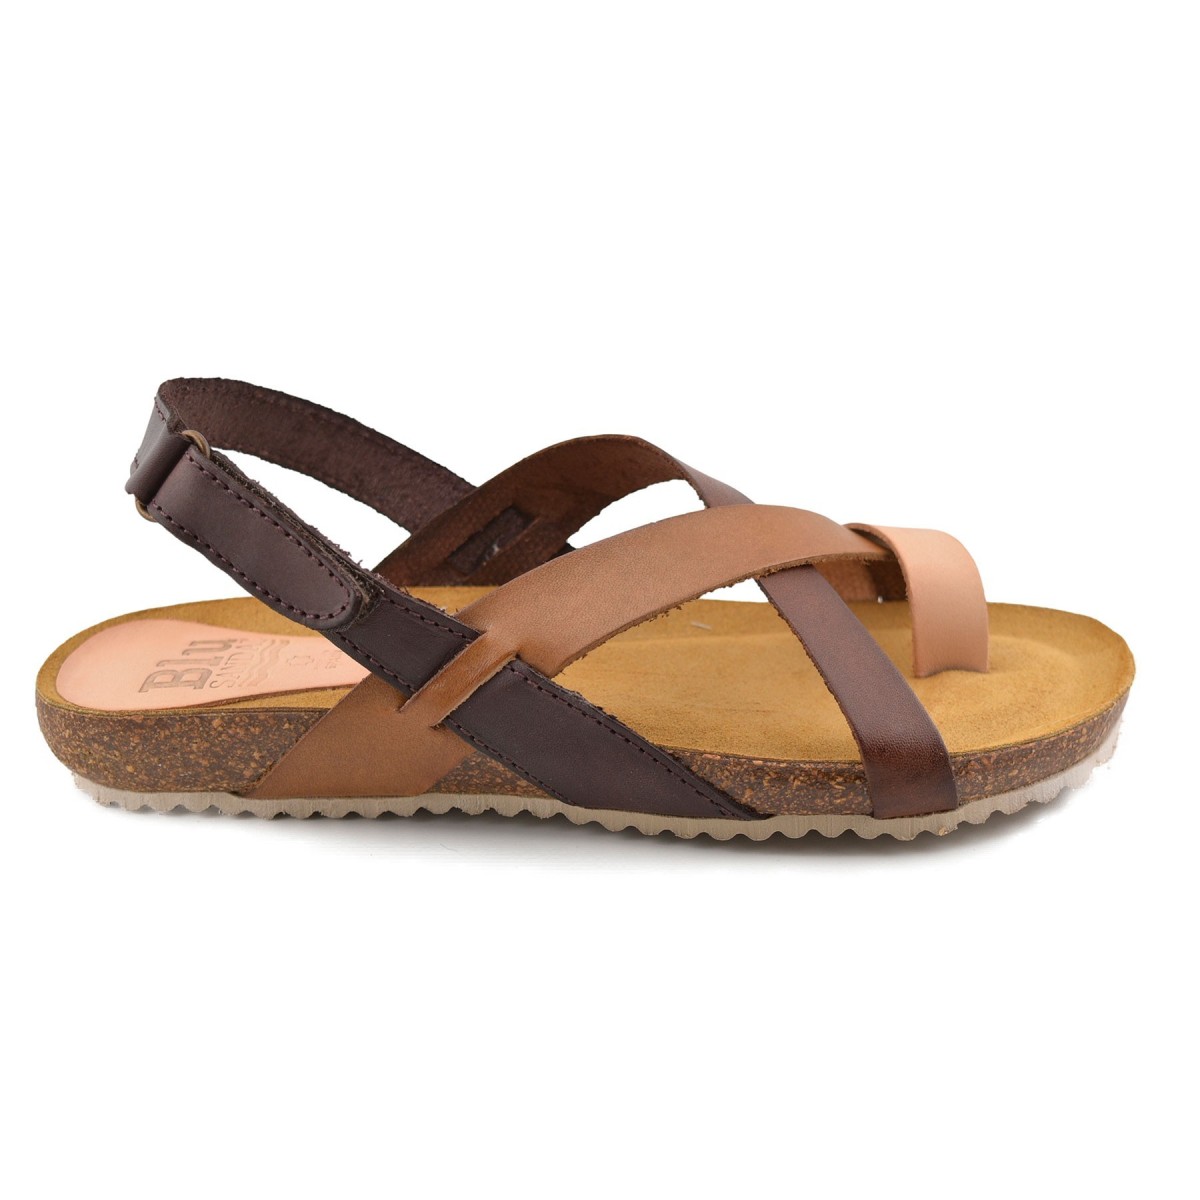 Brown Bio Leather Sandals by Blusandal